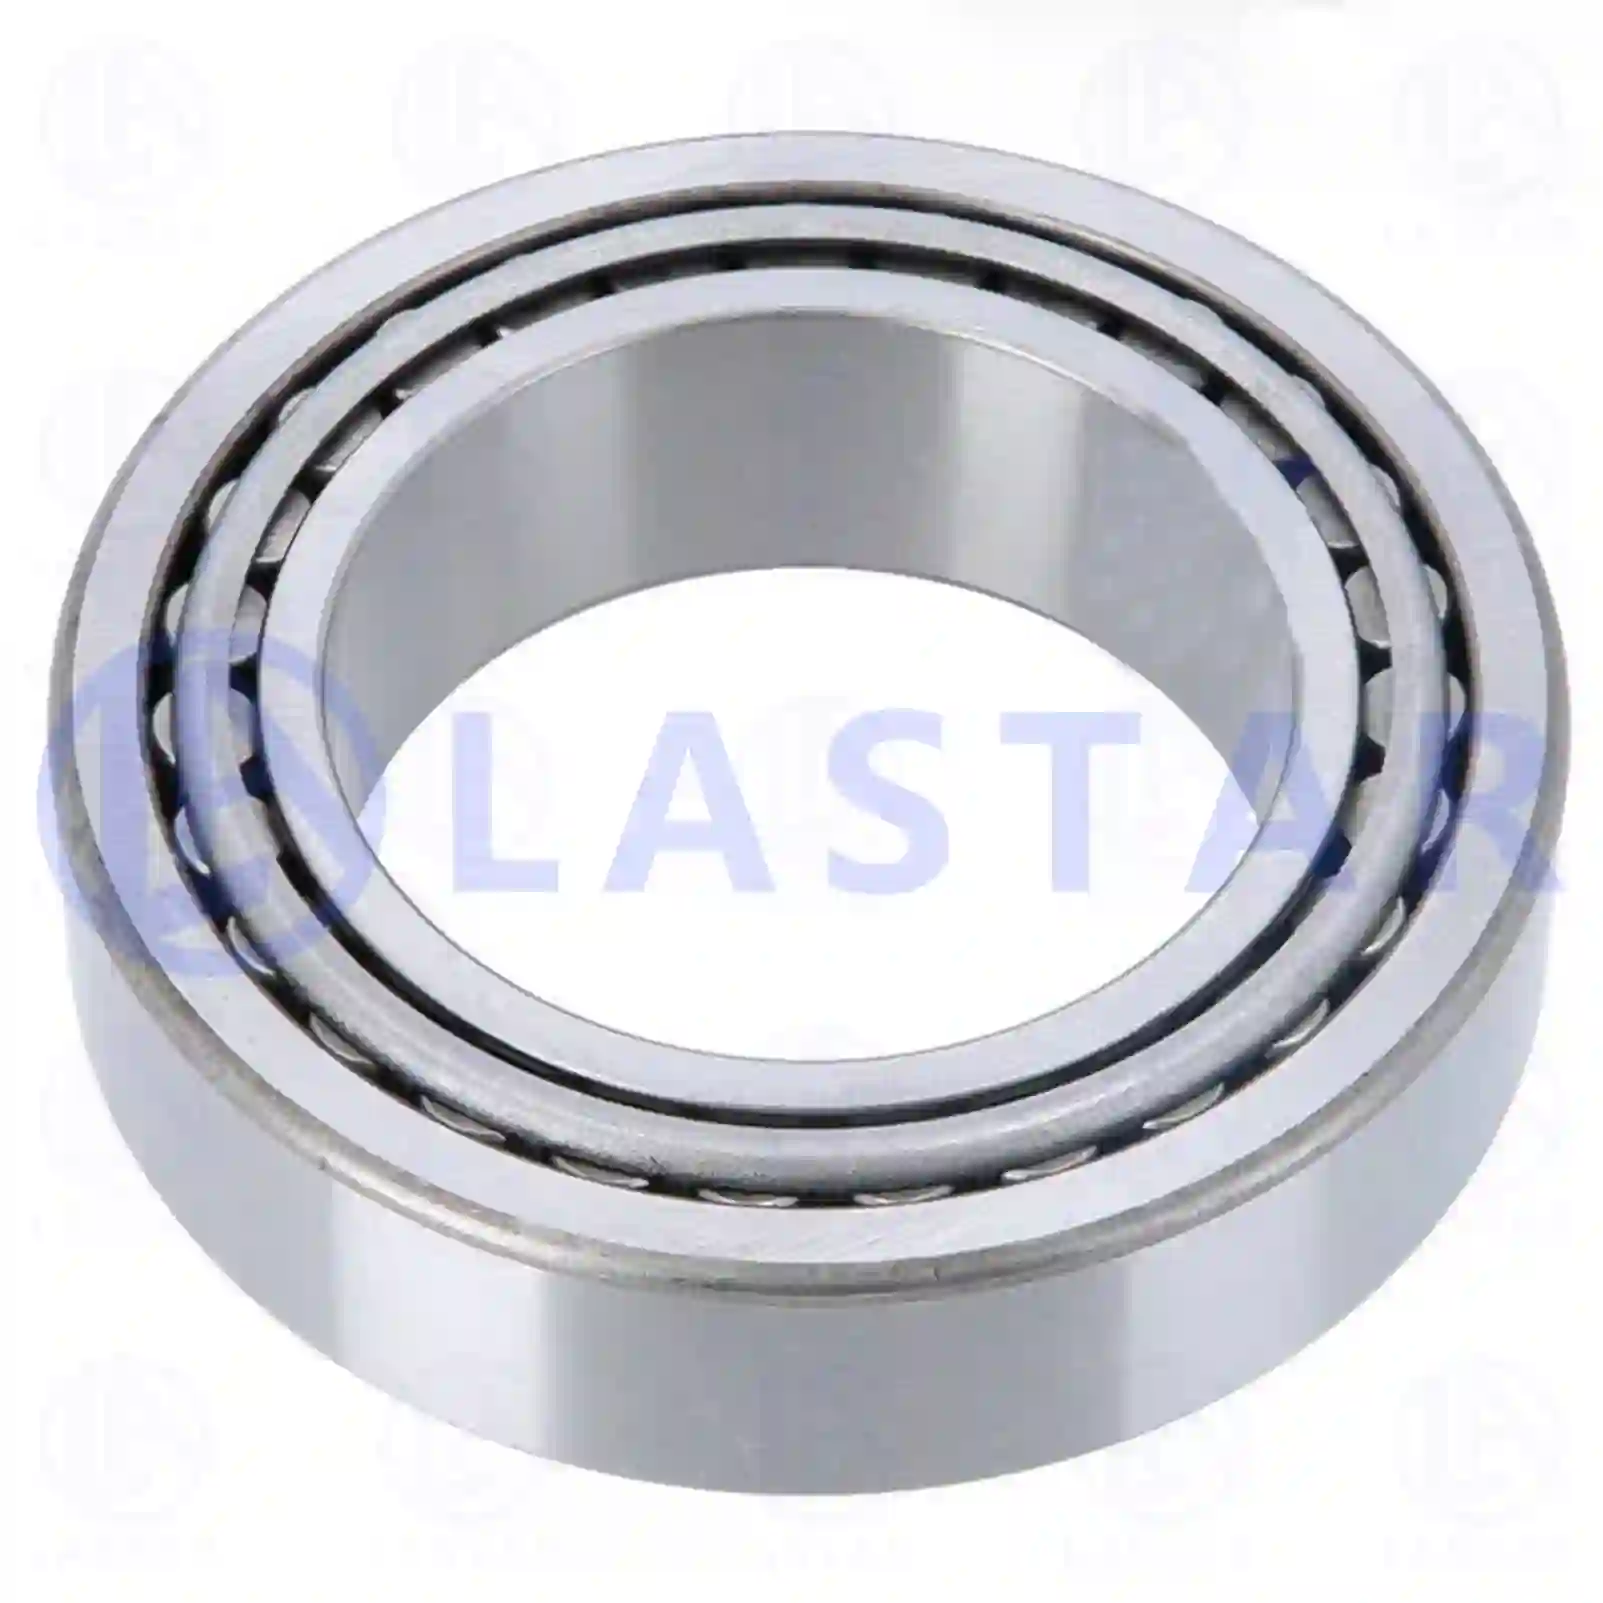 Rear Axle, Complete Tapered roller bearing, la no: 77730746 ,  oem no:06324990109, 06324990110, 81934206016, 0059815505, 0059816905, 0069817605, 5000685837, 5516015839, 5516016788, 183778 Lastar Spare Part | Truck Spare Parts, Auotomotive Spare Parts